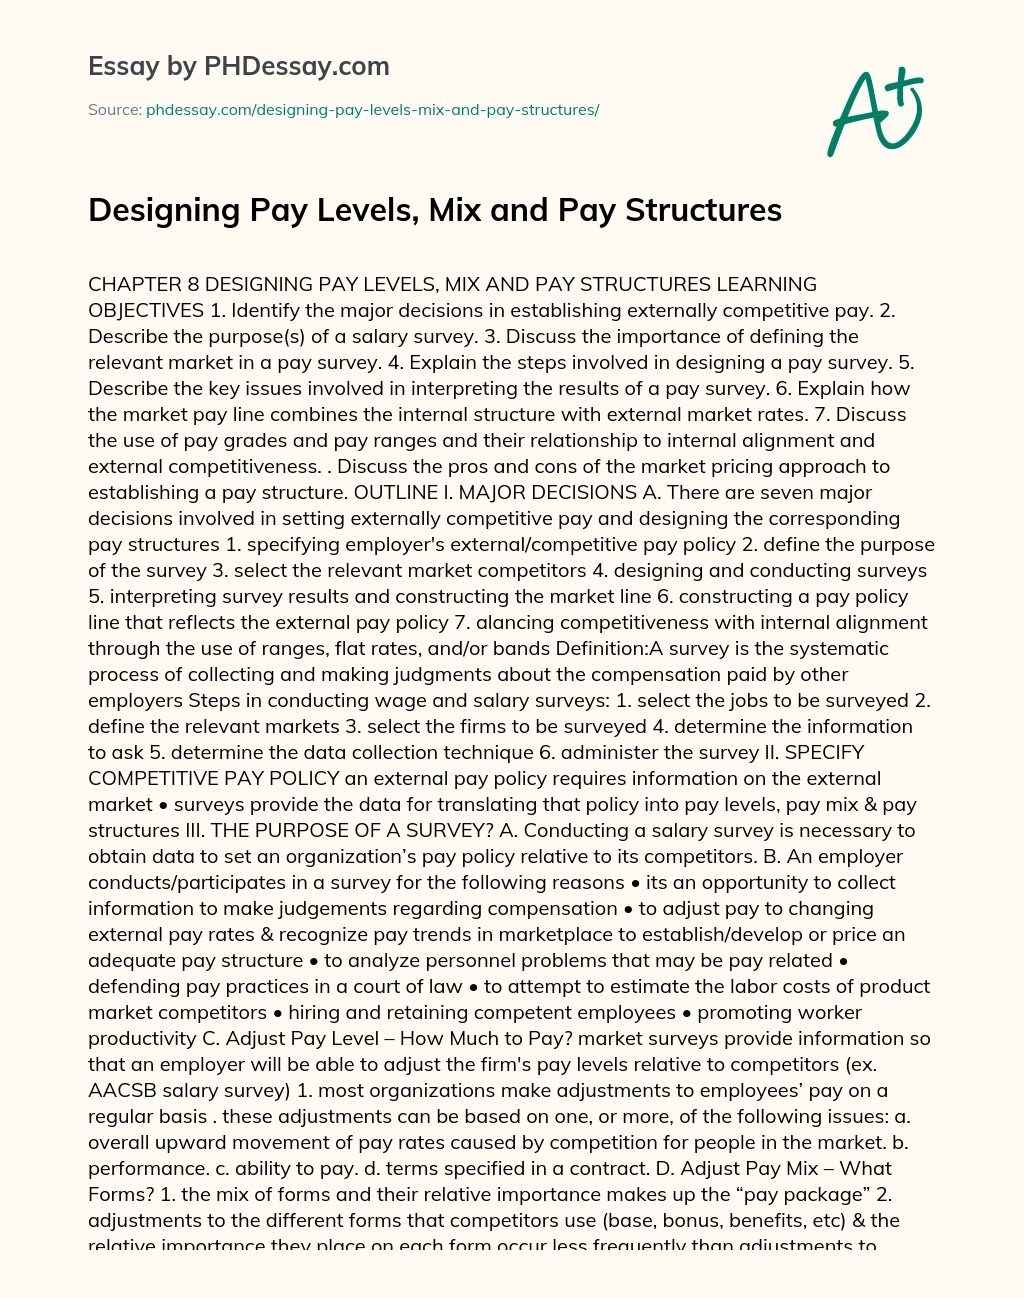 Designing Pay Levels, Mix and Pay Structures essay